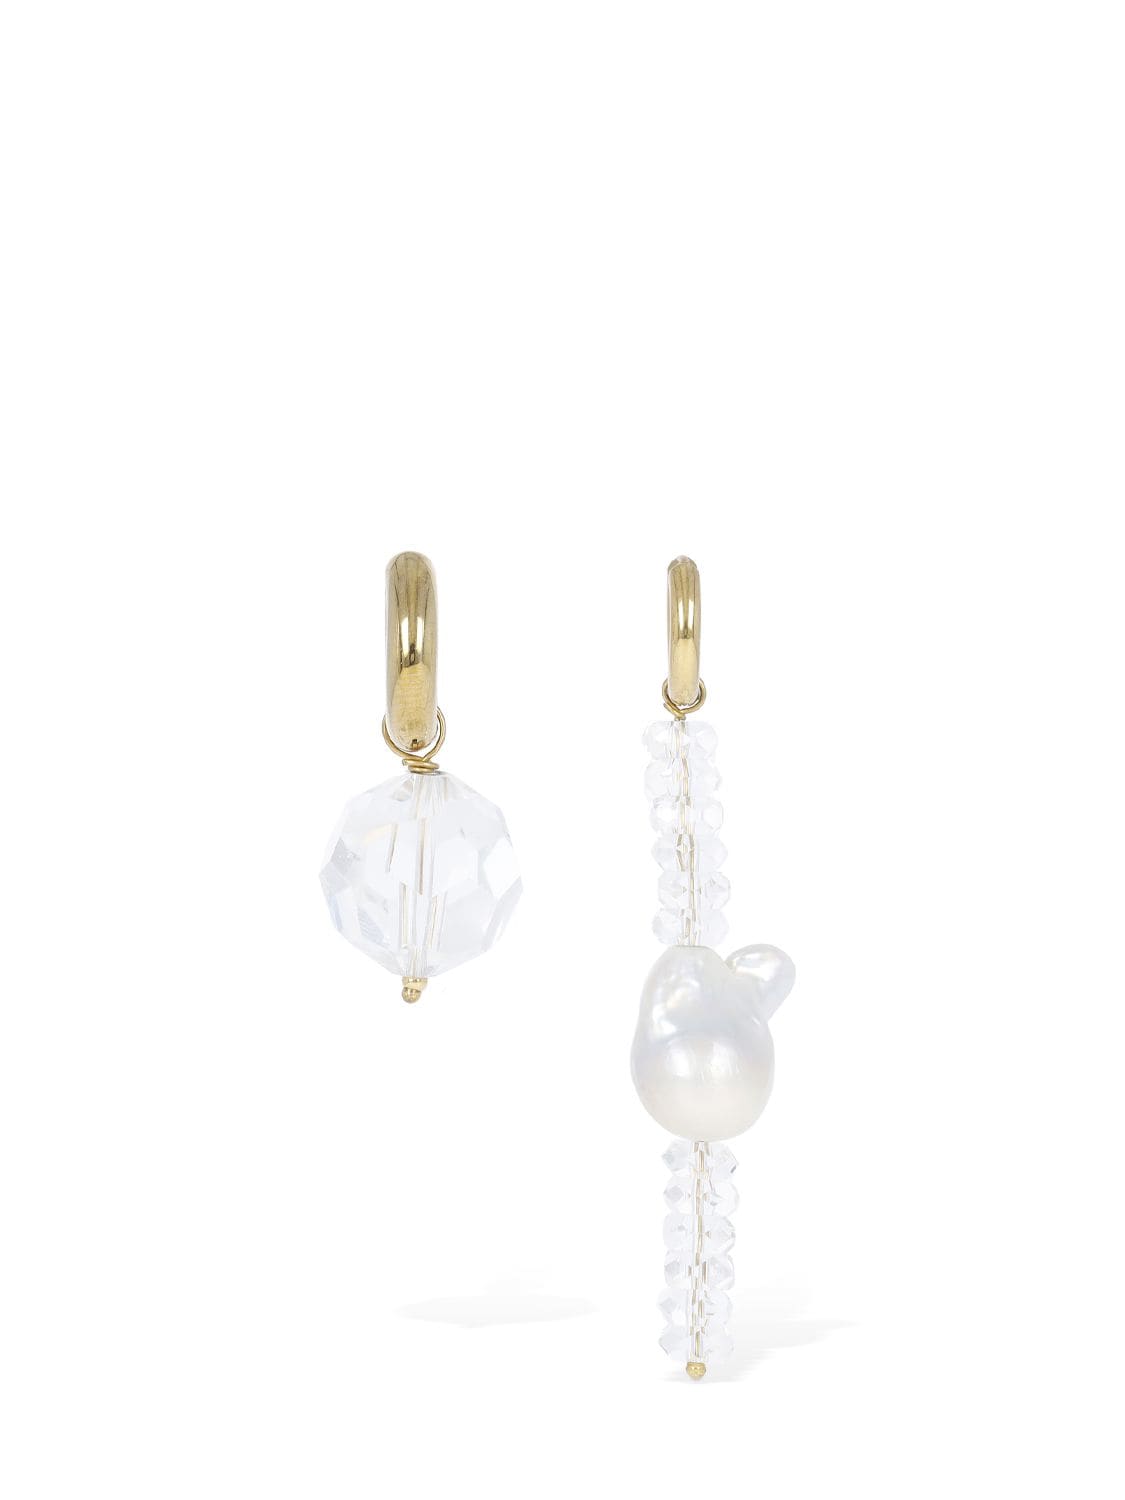 Image of Crystal & Pearl Mismatched Earrings